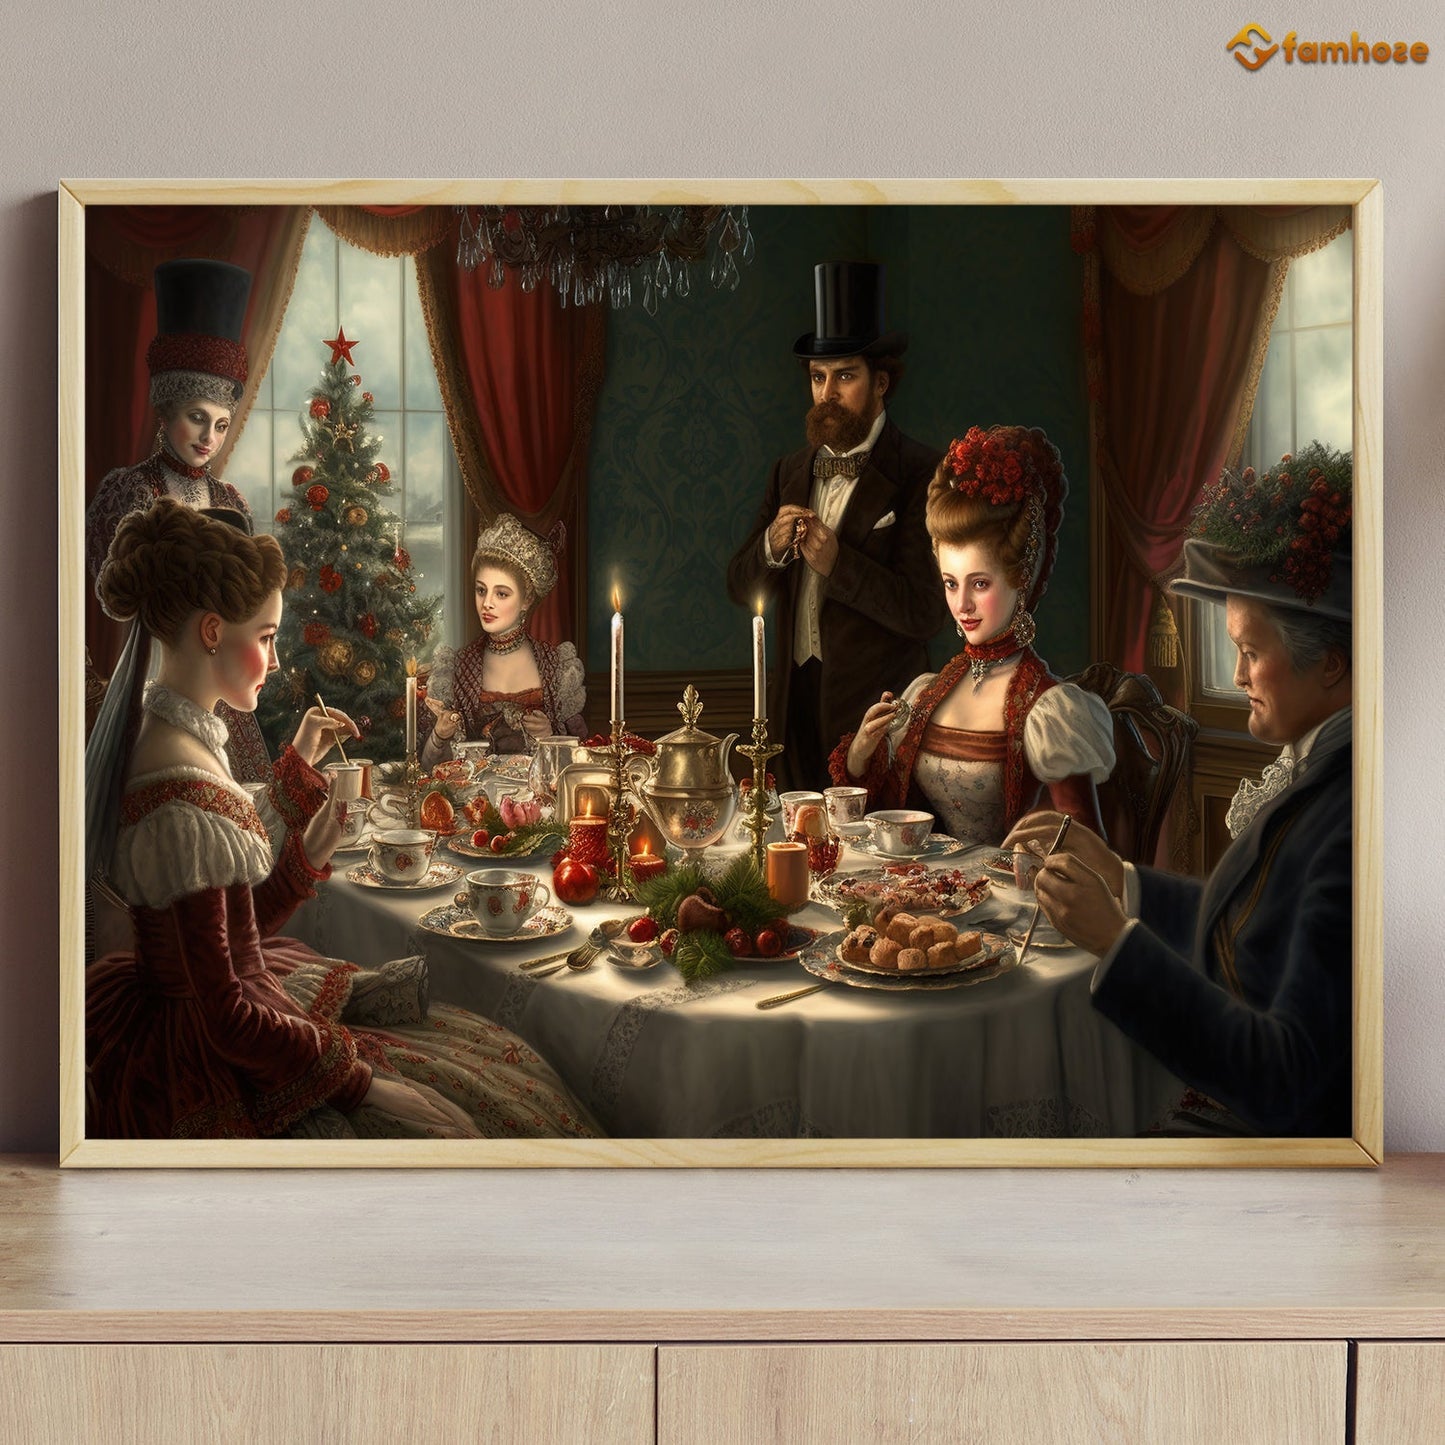 Victorian Christmas Feast Traditions and Elegance Christmas Canvas Painting, Xmas Wall Art Decor - Christmas Poster Gift